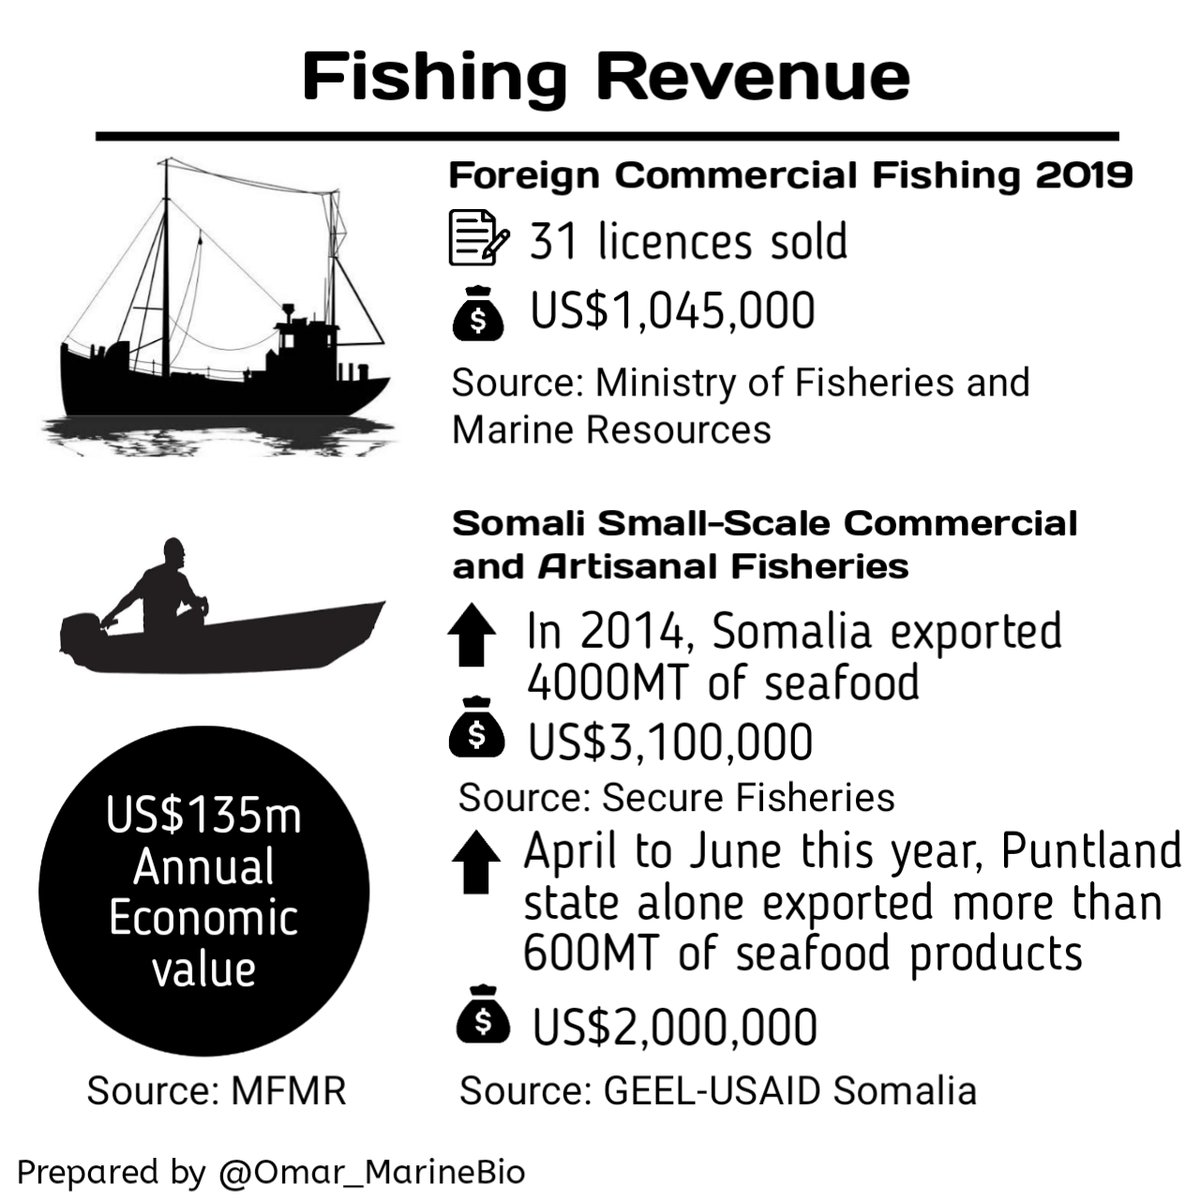 It is officially domestic vs commercial with the same main target species. It's a case of a domestic fisheries sector that contributes US$135m annually to the local economy vs. large industrial fishing vessels with US$1m revenue. Generations will pay for it. /4